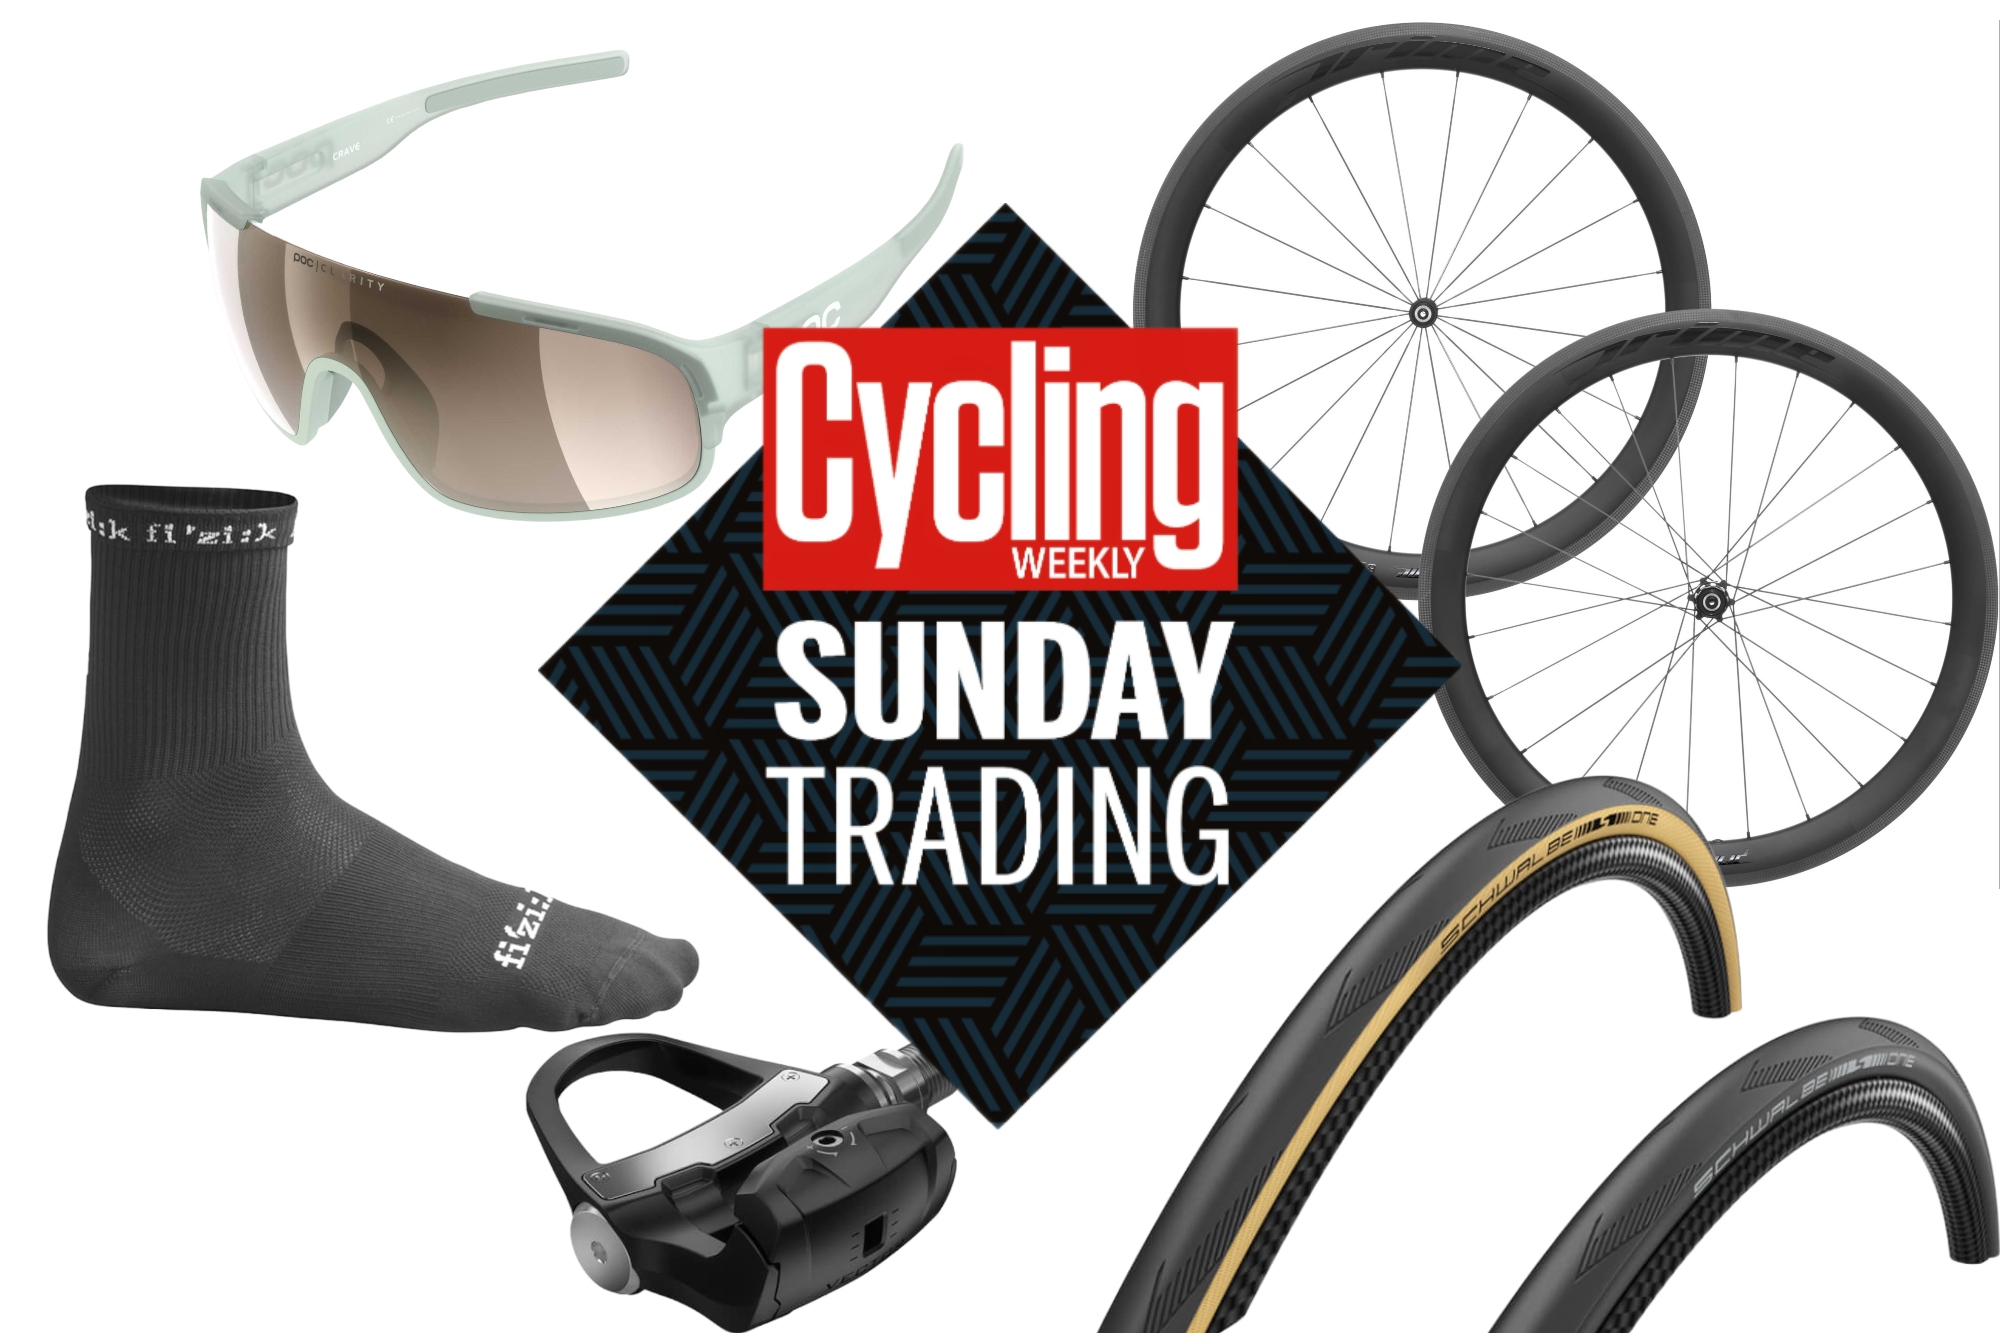 Sunday Trading Schwalbe Pro One Tires Poc Sunglasses Prime Carbon Wheels And Much More Cycling Weekly - heat seeking rocket launcher roblox id